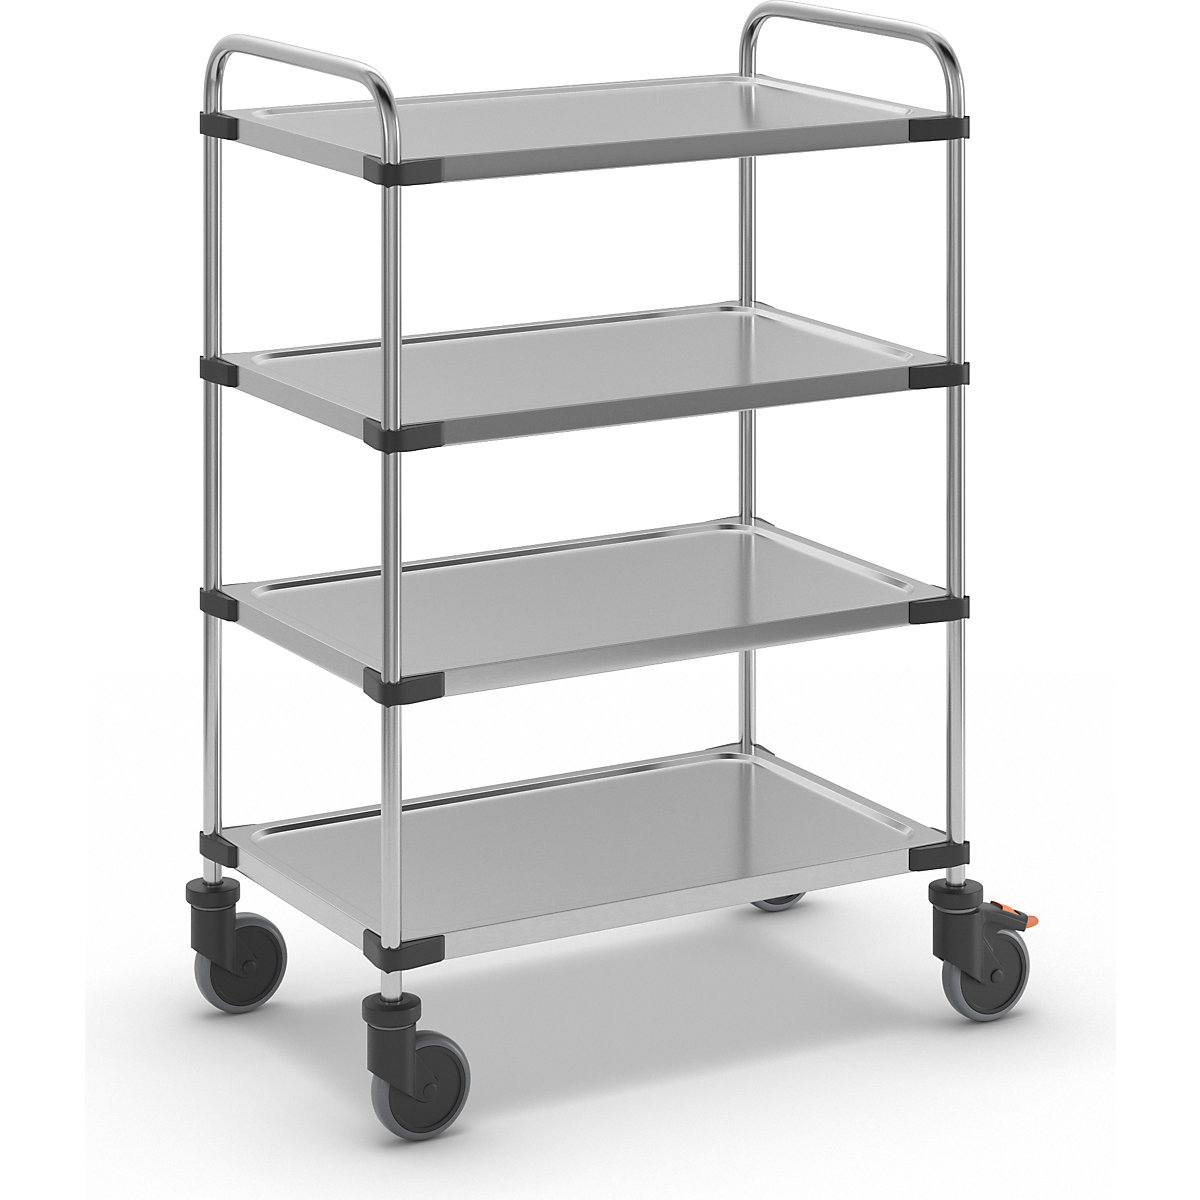 Stainless steel table trolley, with 4 shelves, LxWxH 870 x 570 x 1260 mm, assembled-3